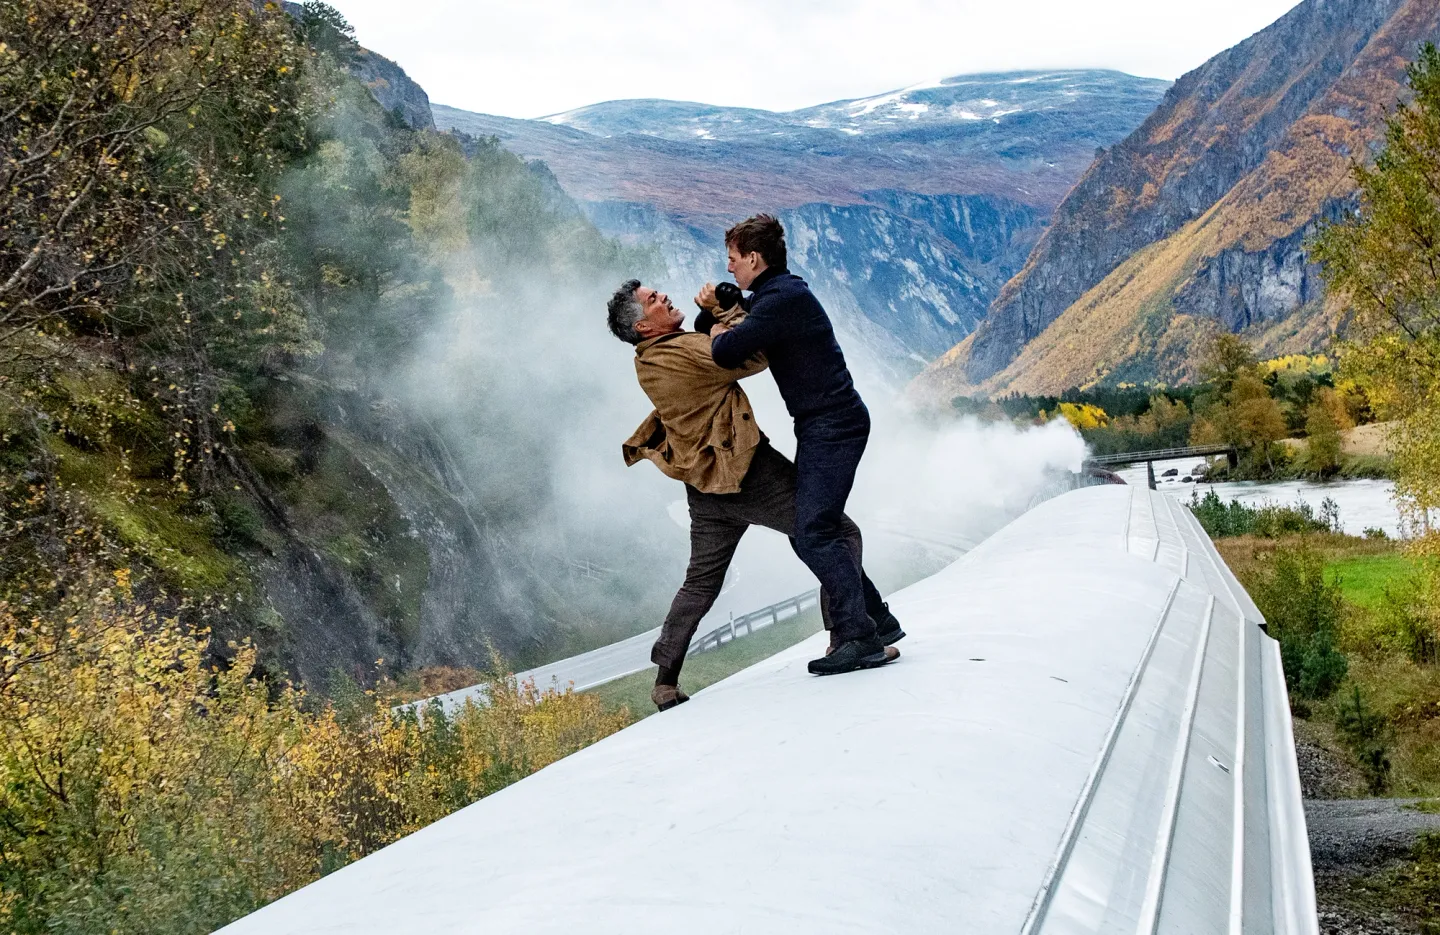 Mission Impossible Dead Reckoning Part One, photo of action sequence on a train in Norway, courtesy of Paramount Pictures